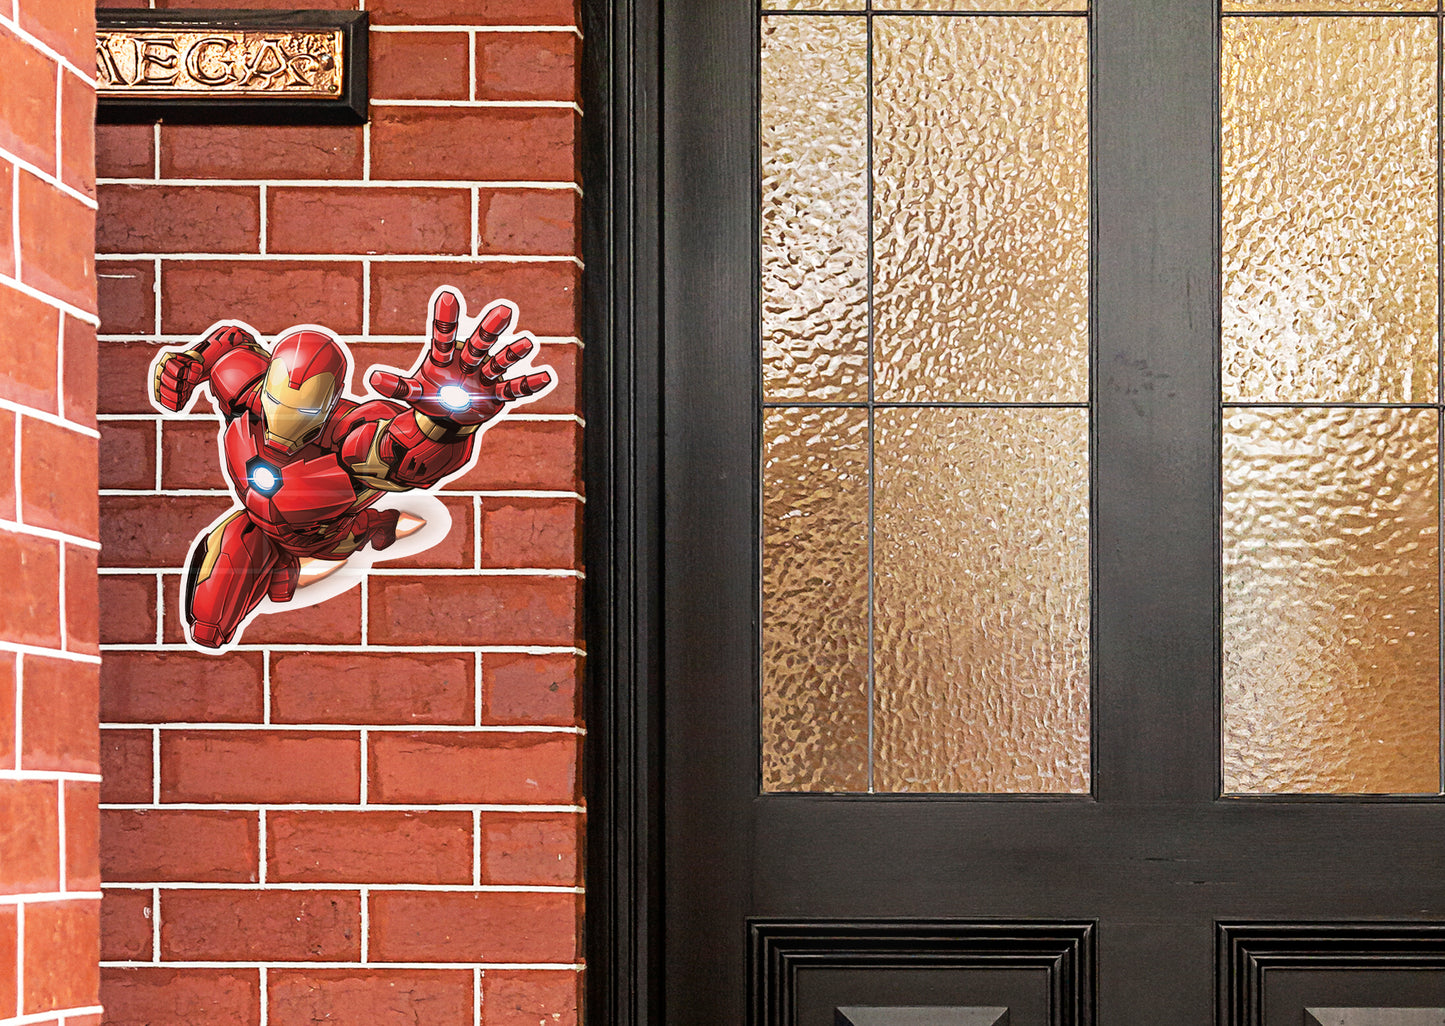 Iron Man: Iron Man Fighting        - Officially Licensed Marvel    Outdoor Graphic